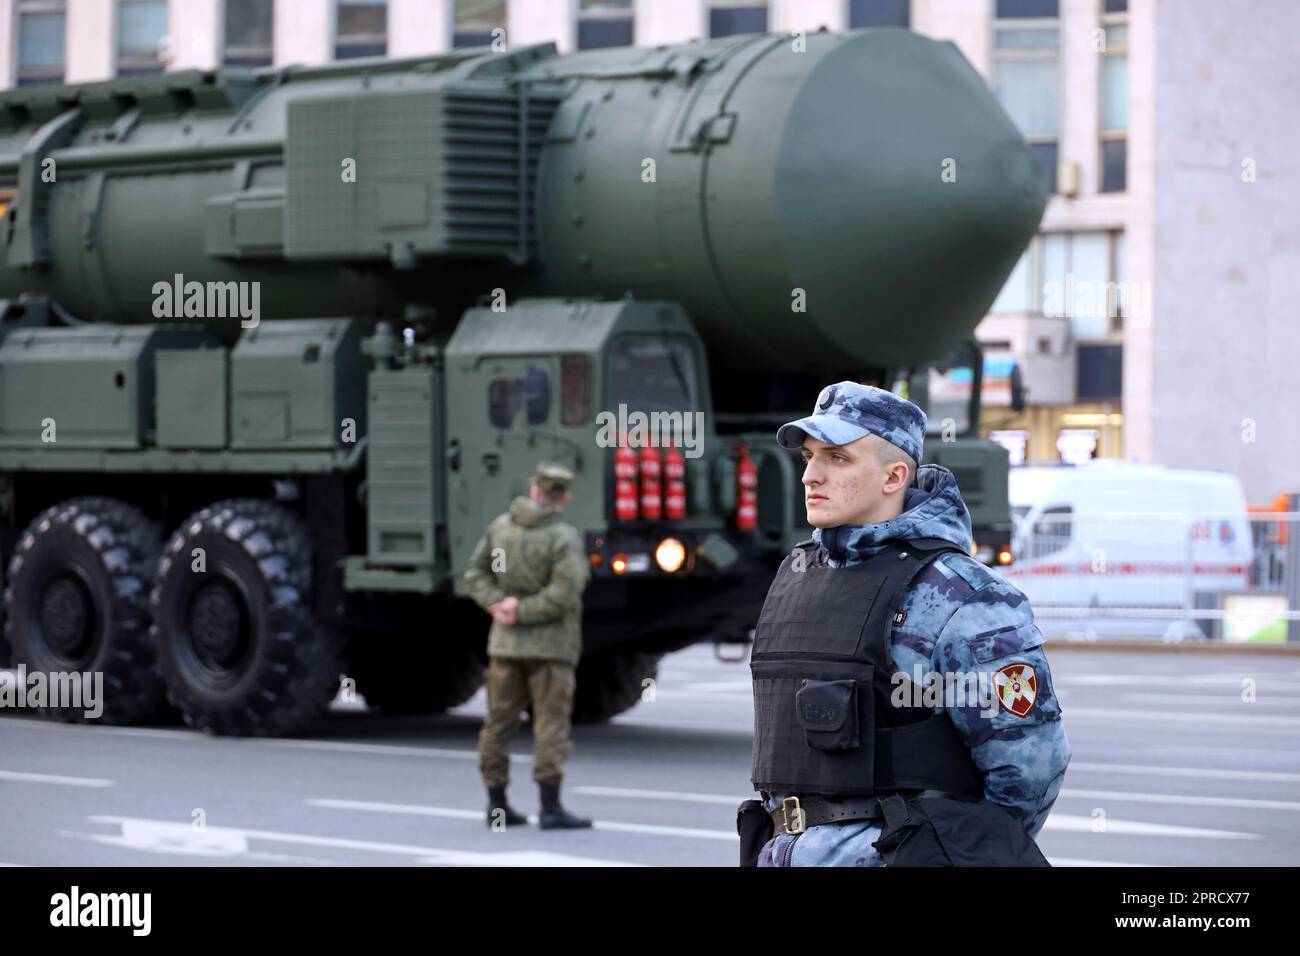 Nuclear weapon, soldiers of russian military forces standing on background of strategic missile system 'Yars' on city street Stock Photo